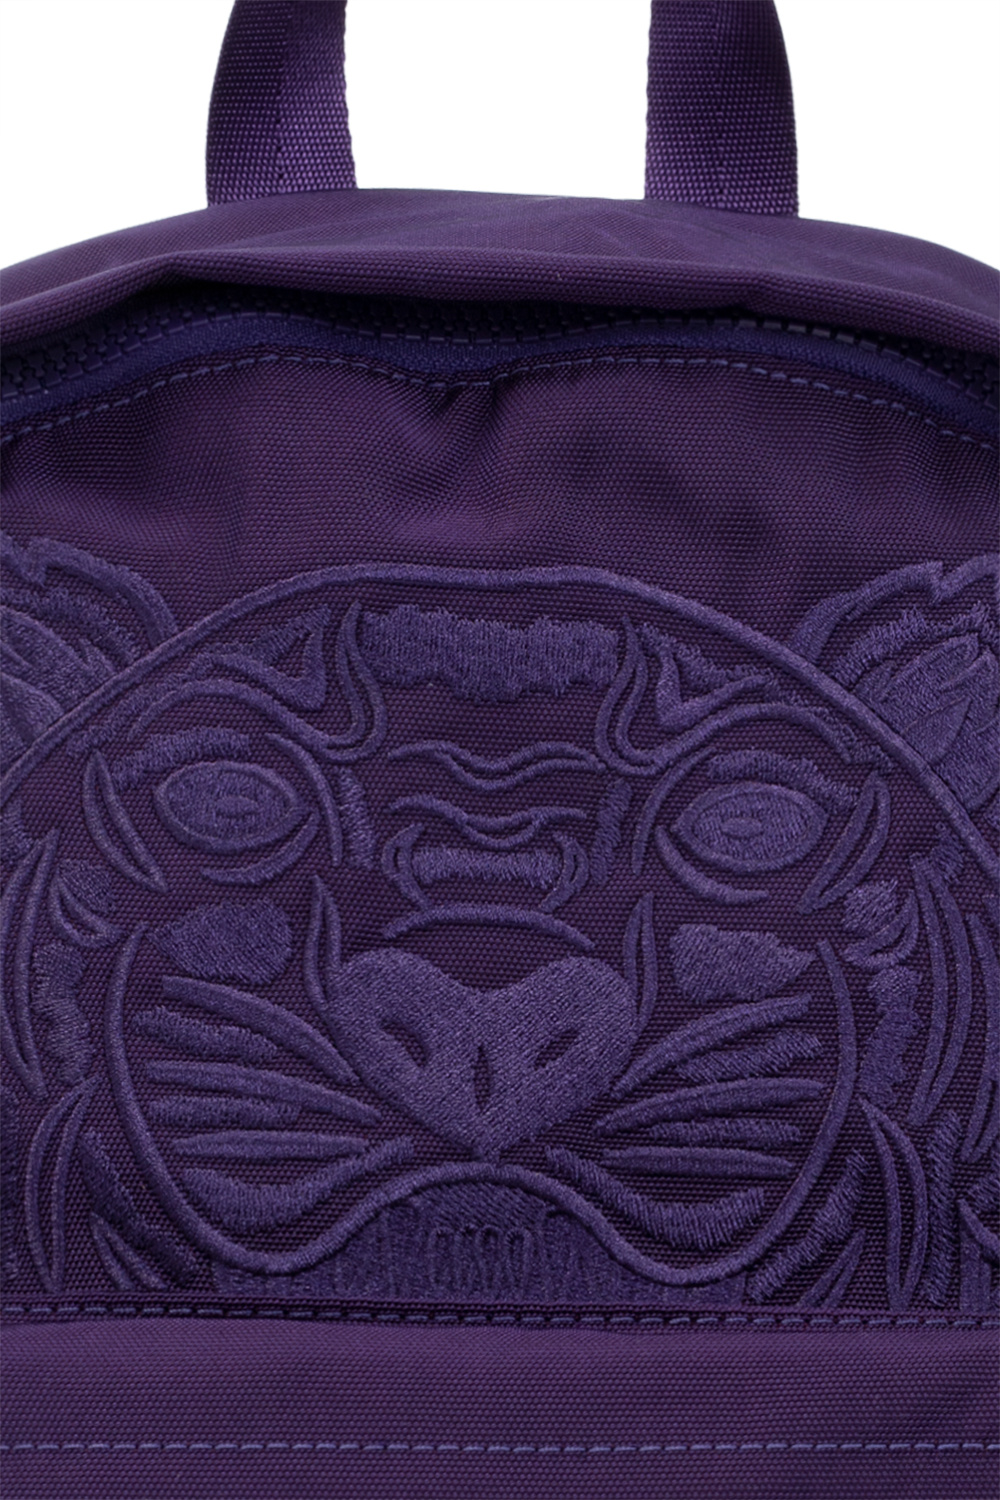 Kenzo Backpack with tiger motif